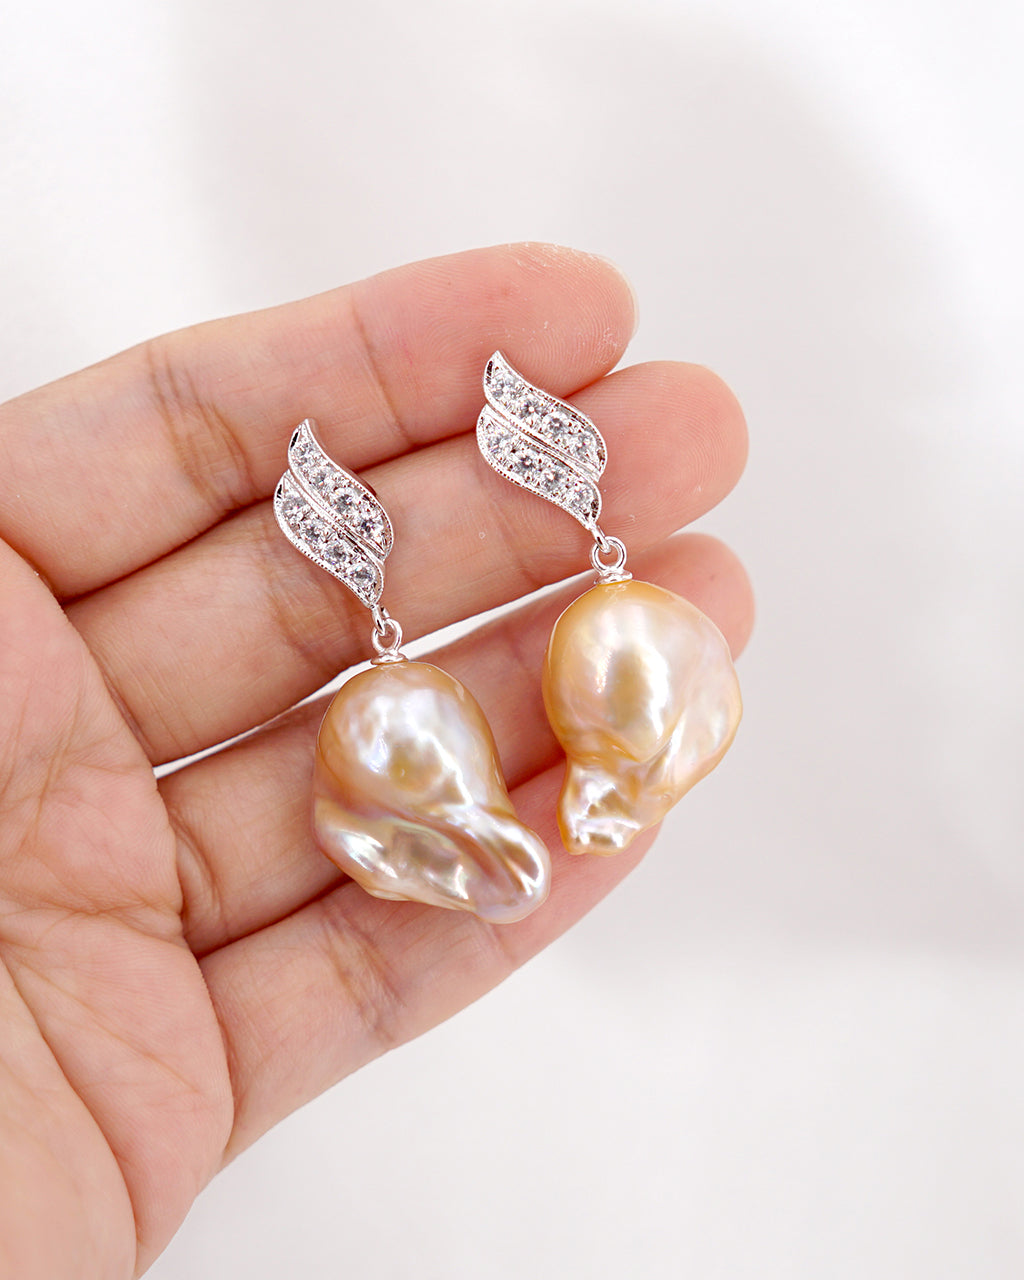 Fresh Water Baroque Pearl Gold Earrings, Flame Ball Pearl Earrings for Wedding, White Pearl Gold Earrings, Anniversary Gifts, Se156